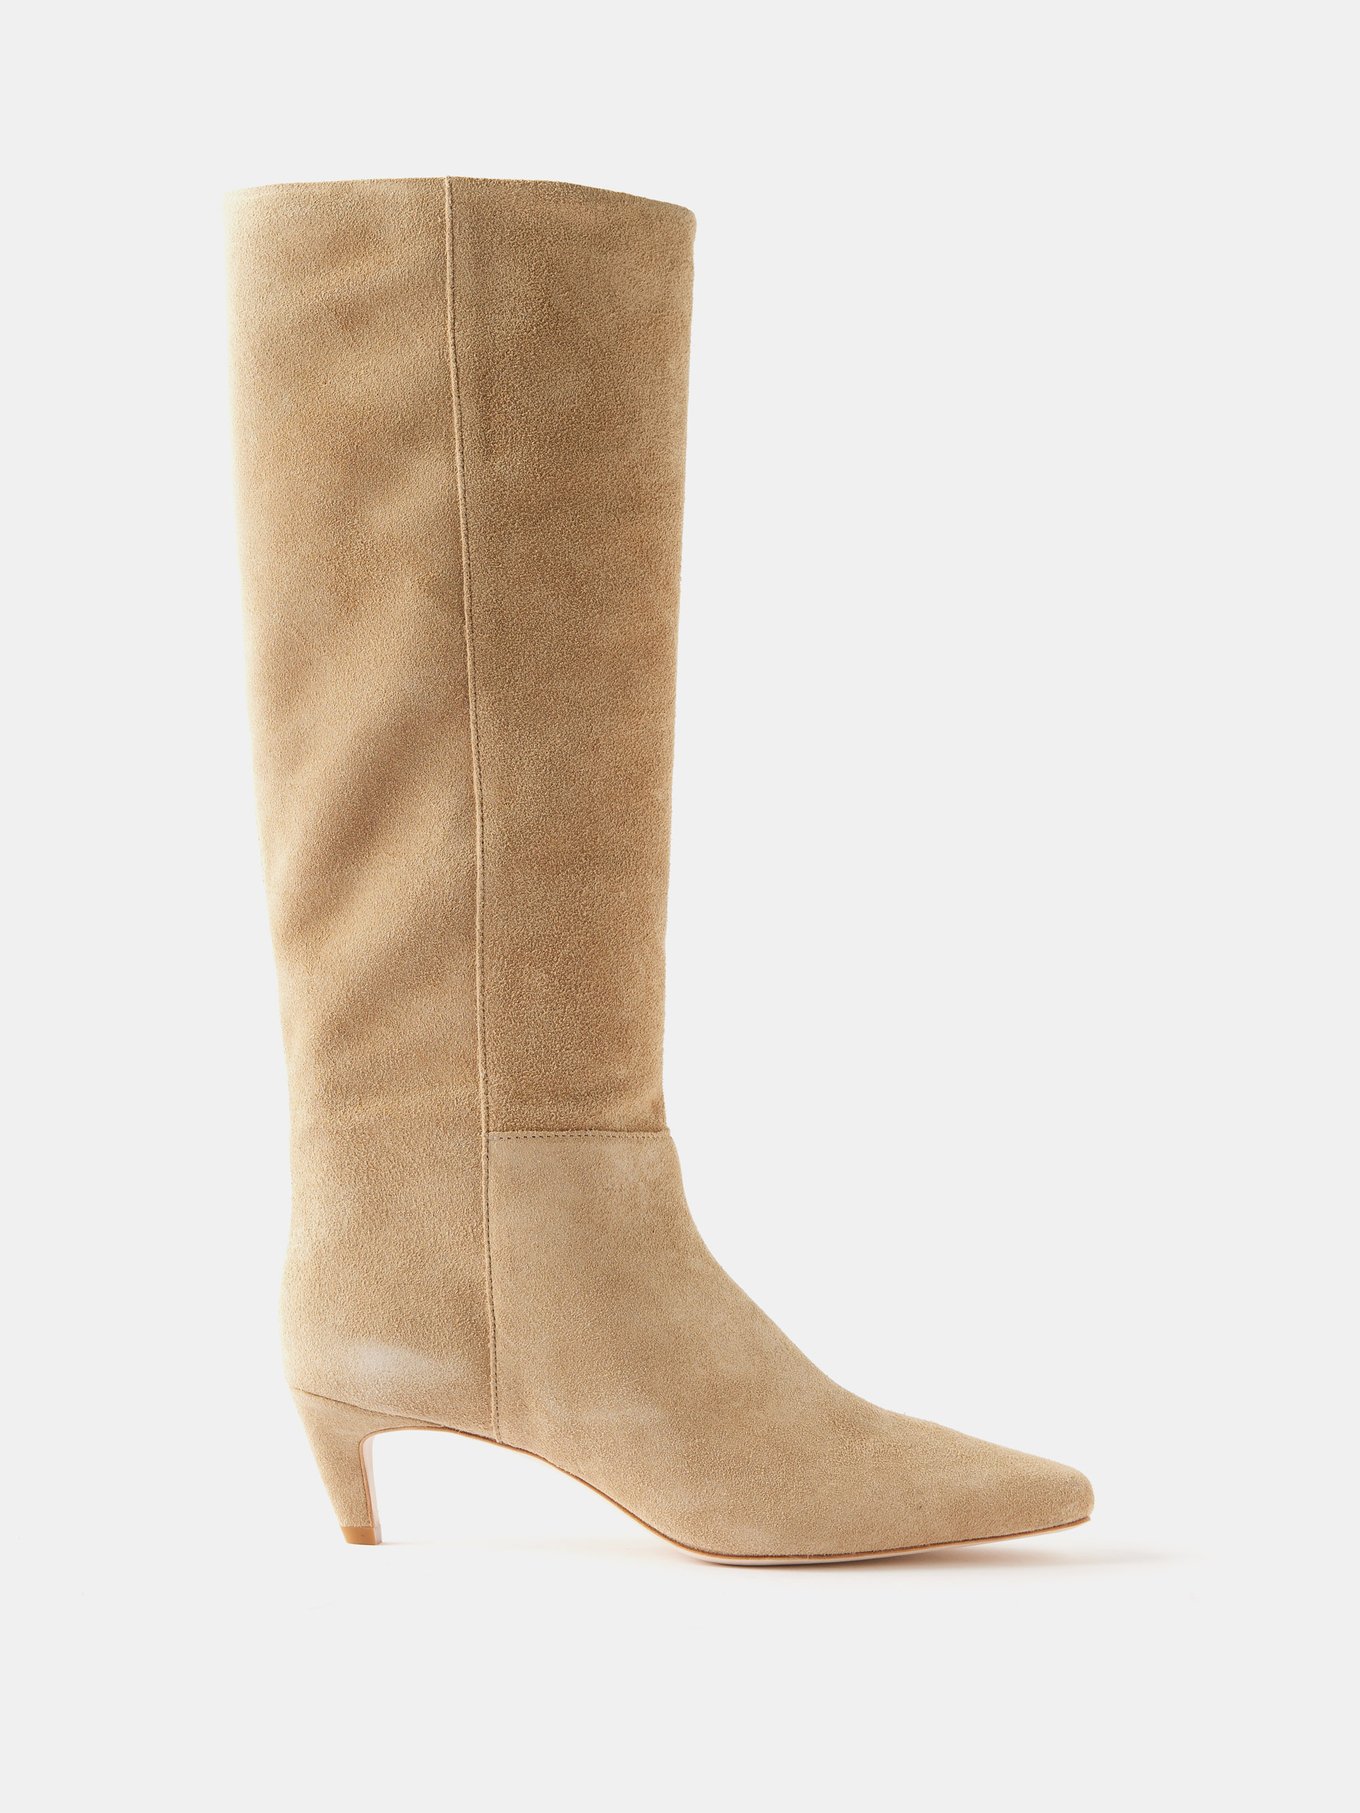 Remy 50 suede knee-high boots | Reformation